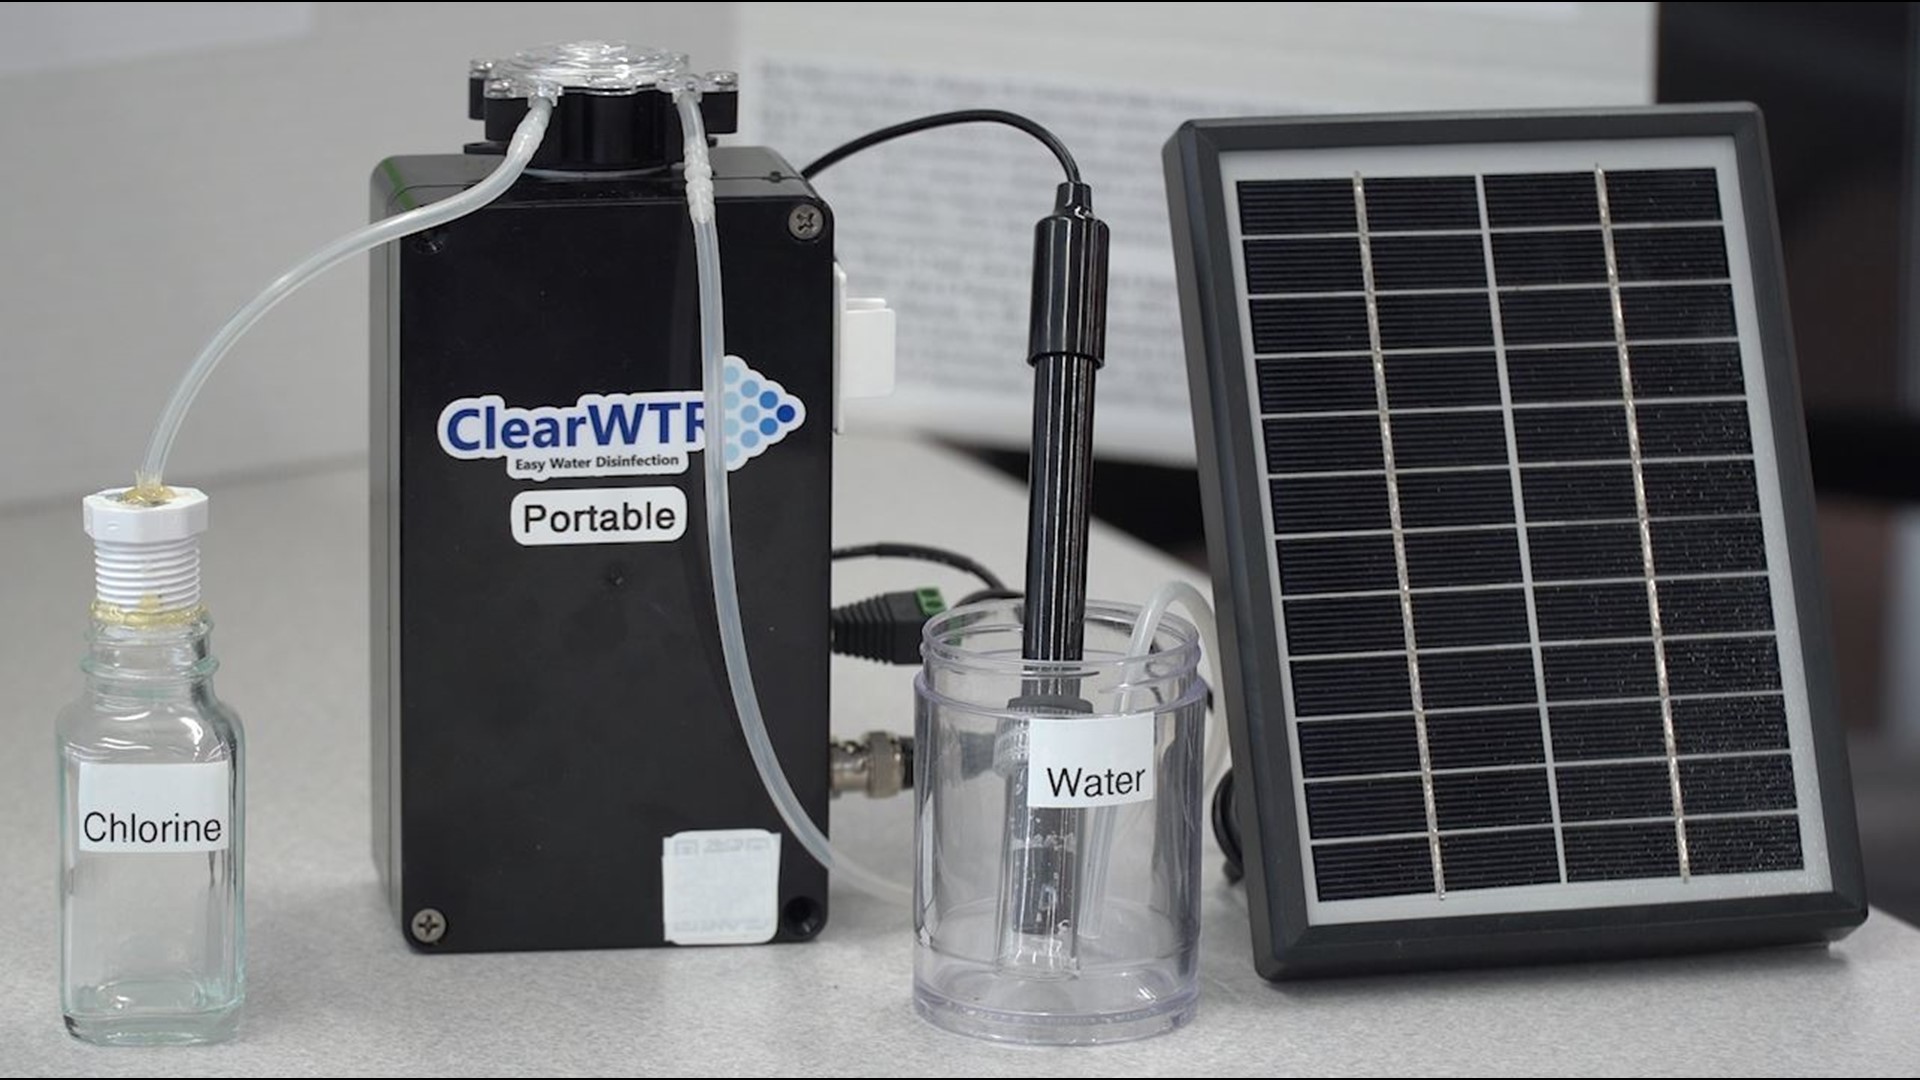 Colleyville student, Daniel Thomas, is working on his invention, ClearWTR Portable. It's an affordable solar-powered way to clean water.